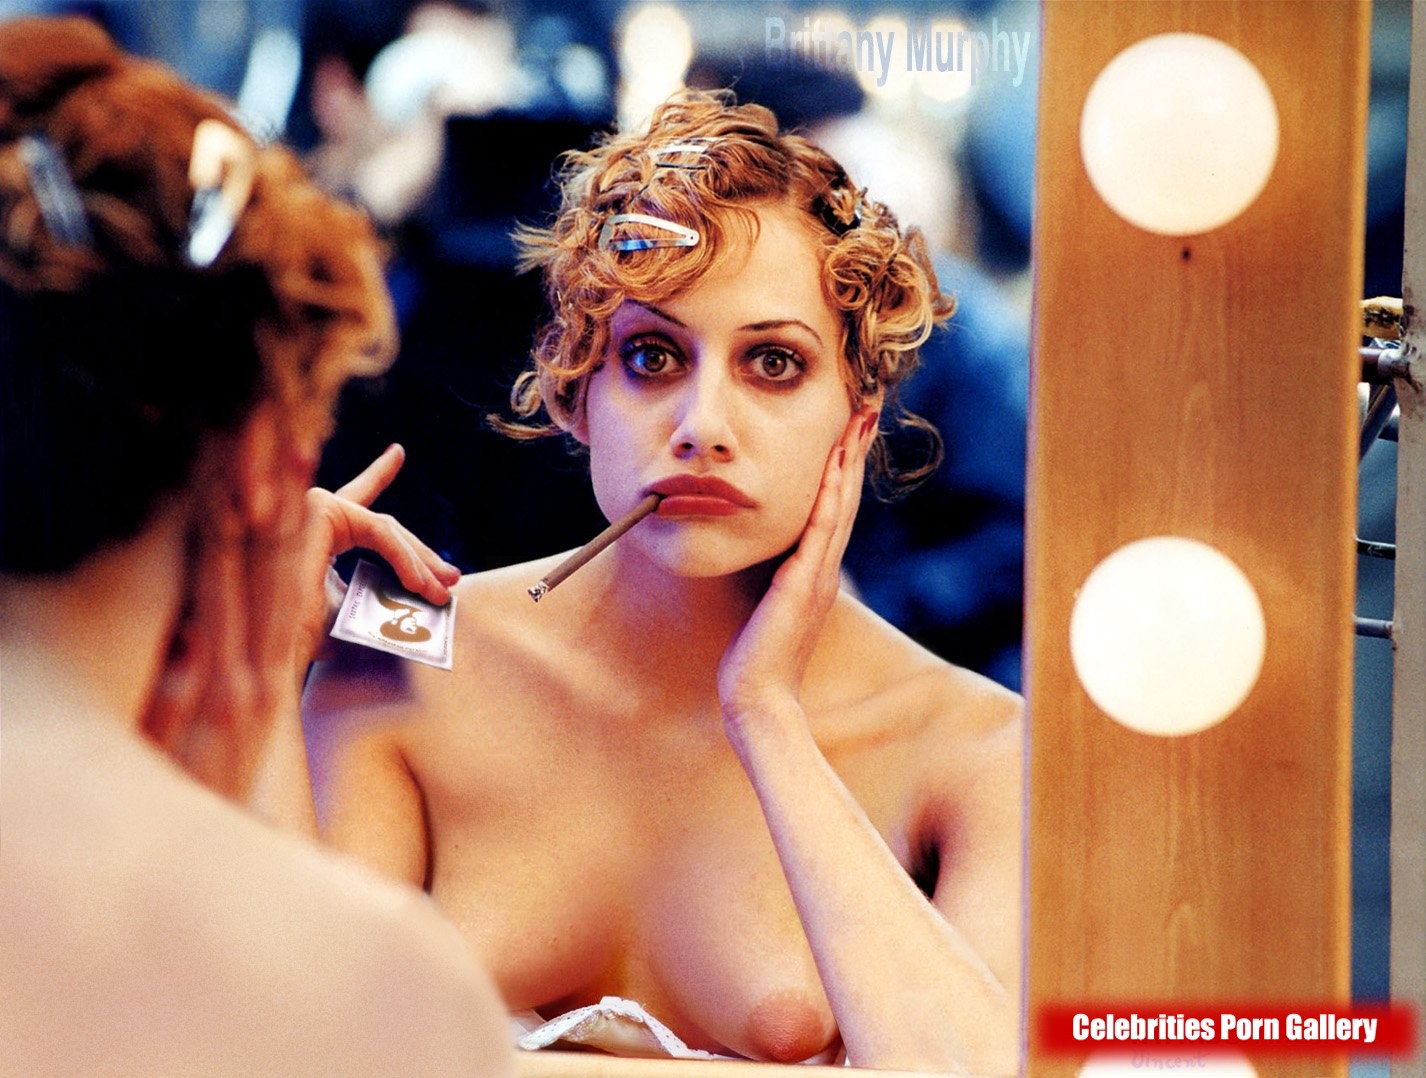 Brittany Murphy Celebrities Naked » Brittany-Murphy-nude-celebrities-img-001  - Celebrity Porn Gallery